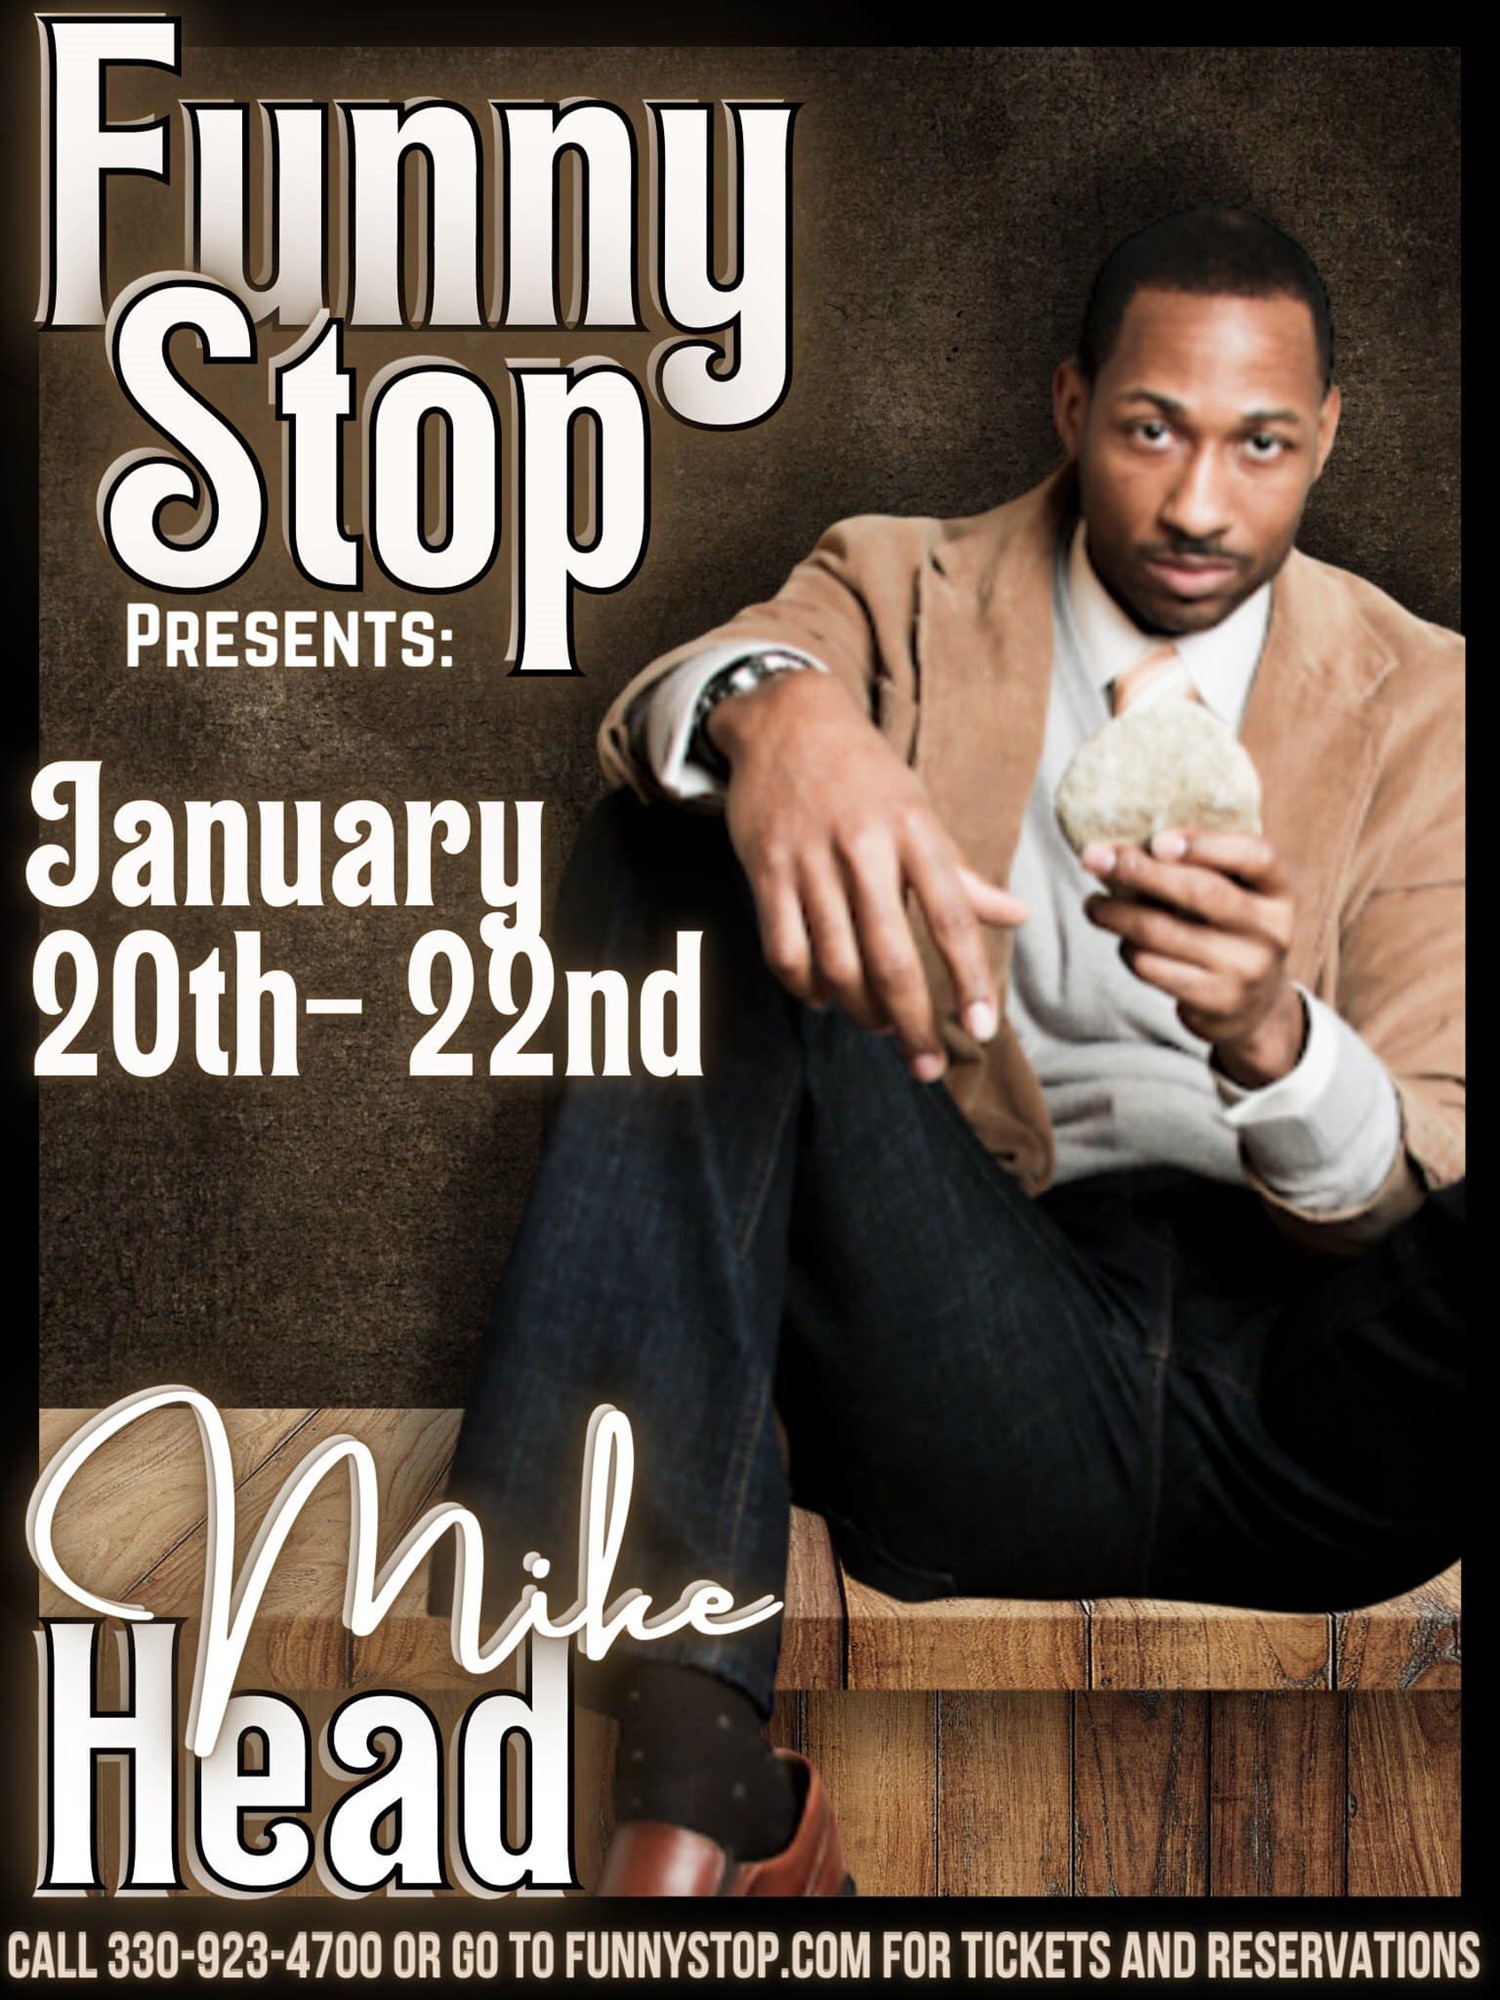 Mike Head Friday 9:20 Show  on ene. 21, 21:20@Funny Stop Comedy Club - Buy tickets and Get information on Funny Stop funnystop.online